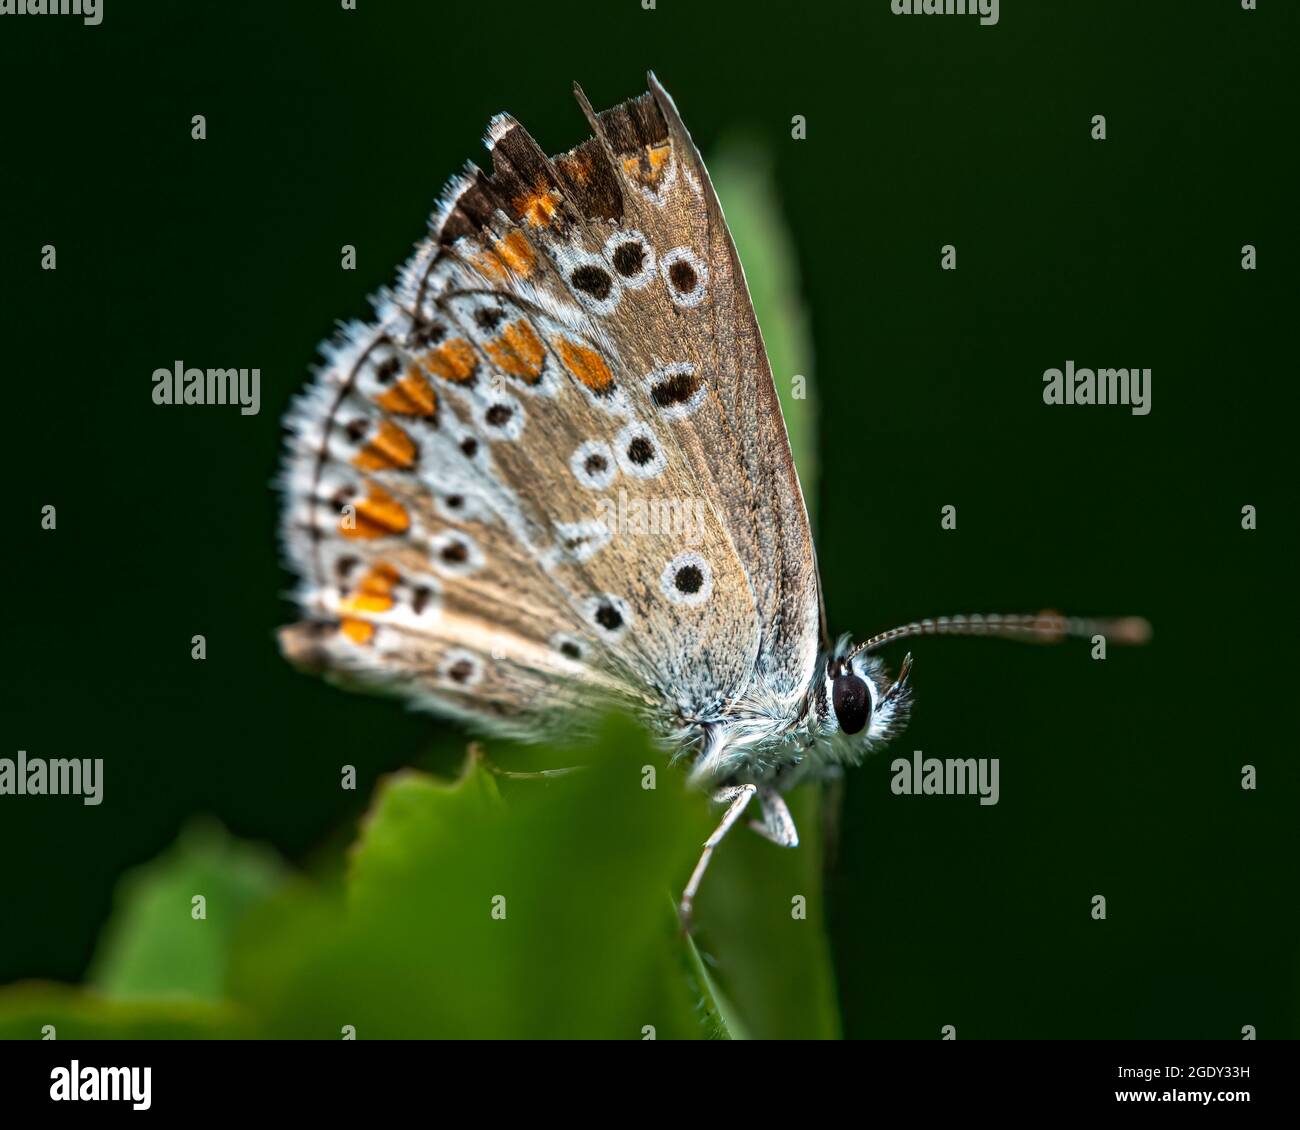 A macro shot of a geranium argus butterfly on a leaf in front of a black backgr Stock Photo